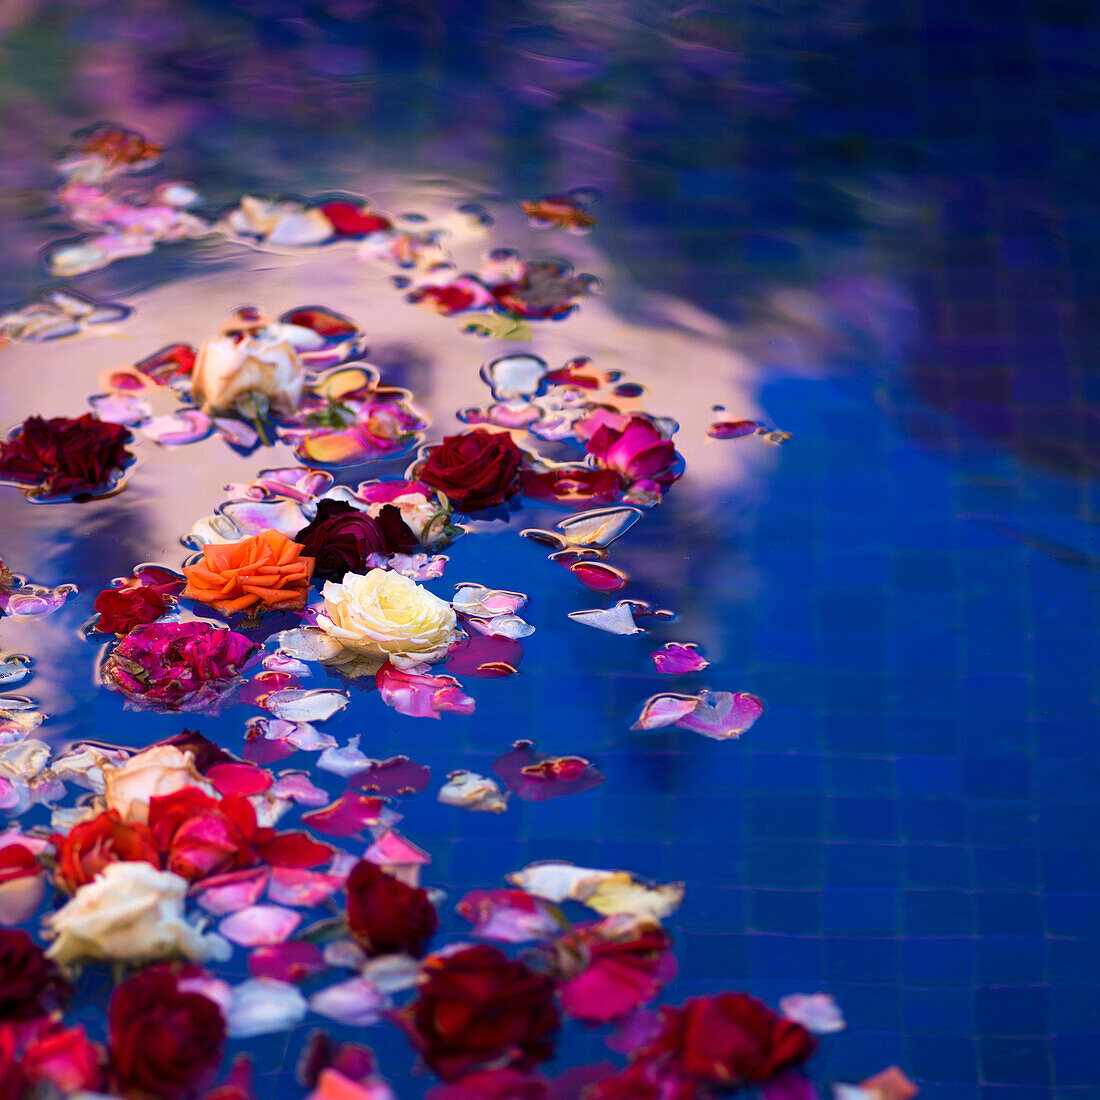 Floating roses and petals in a pool with blue tile